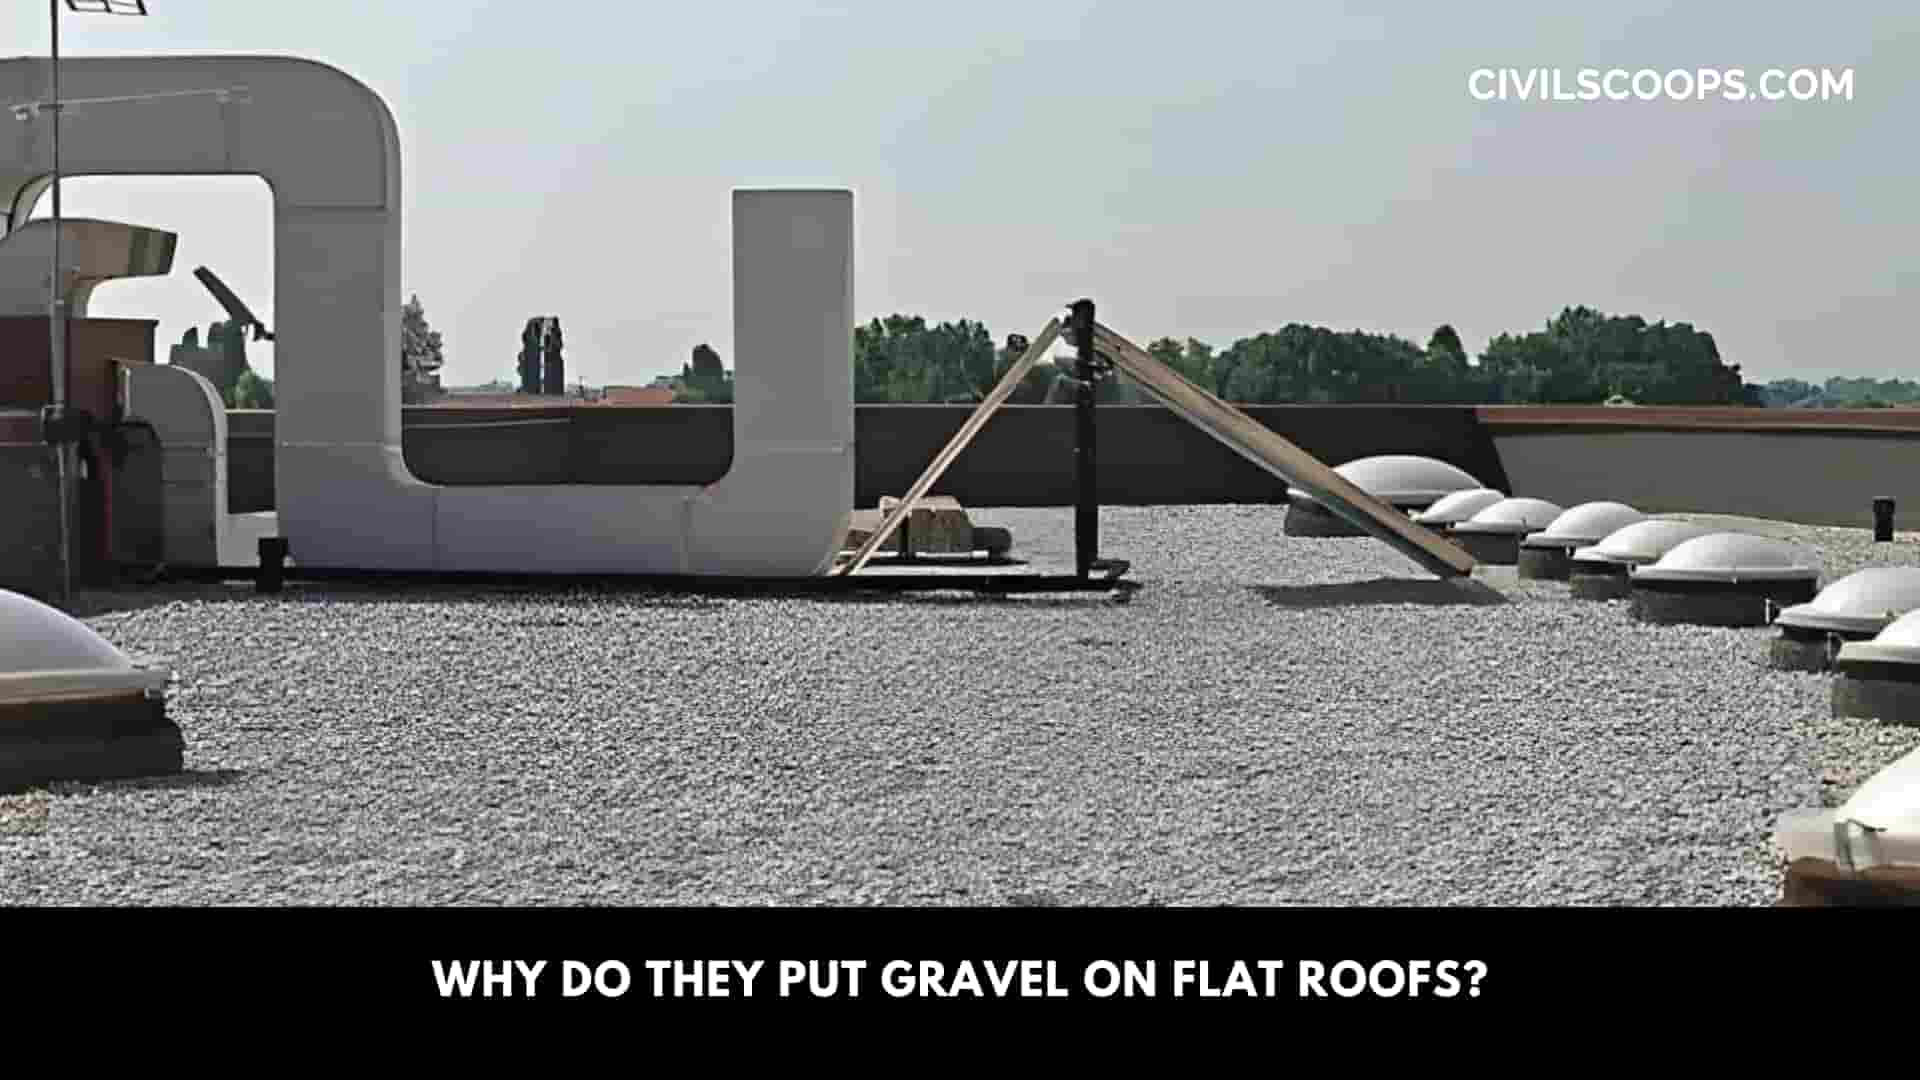 Why Do They Put Gravel on Flat Roofs?